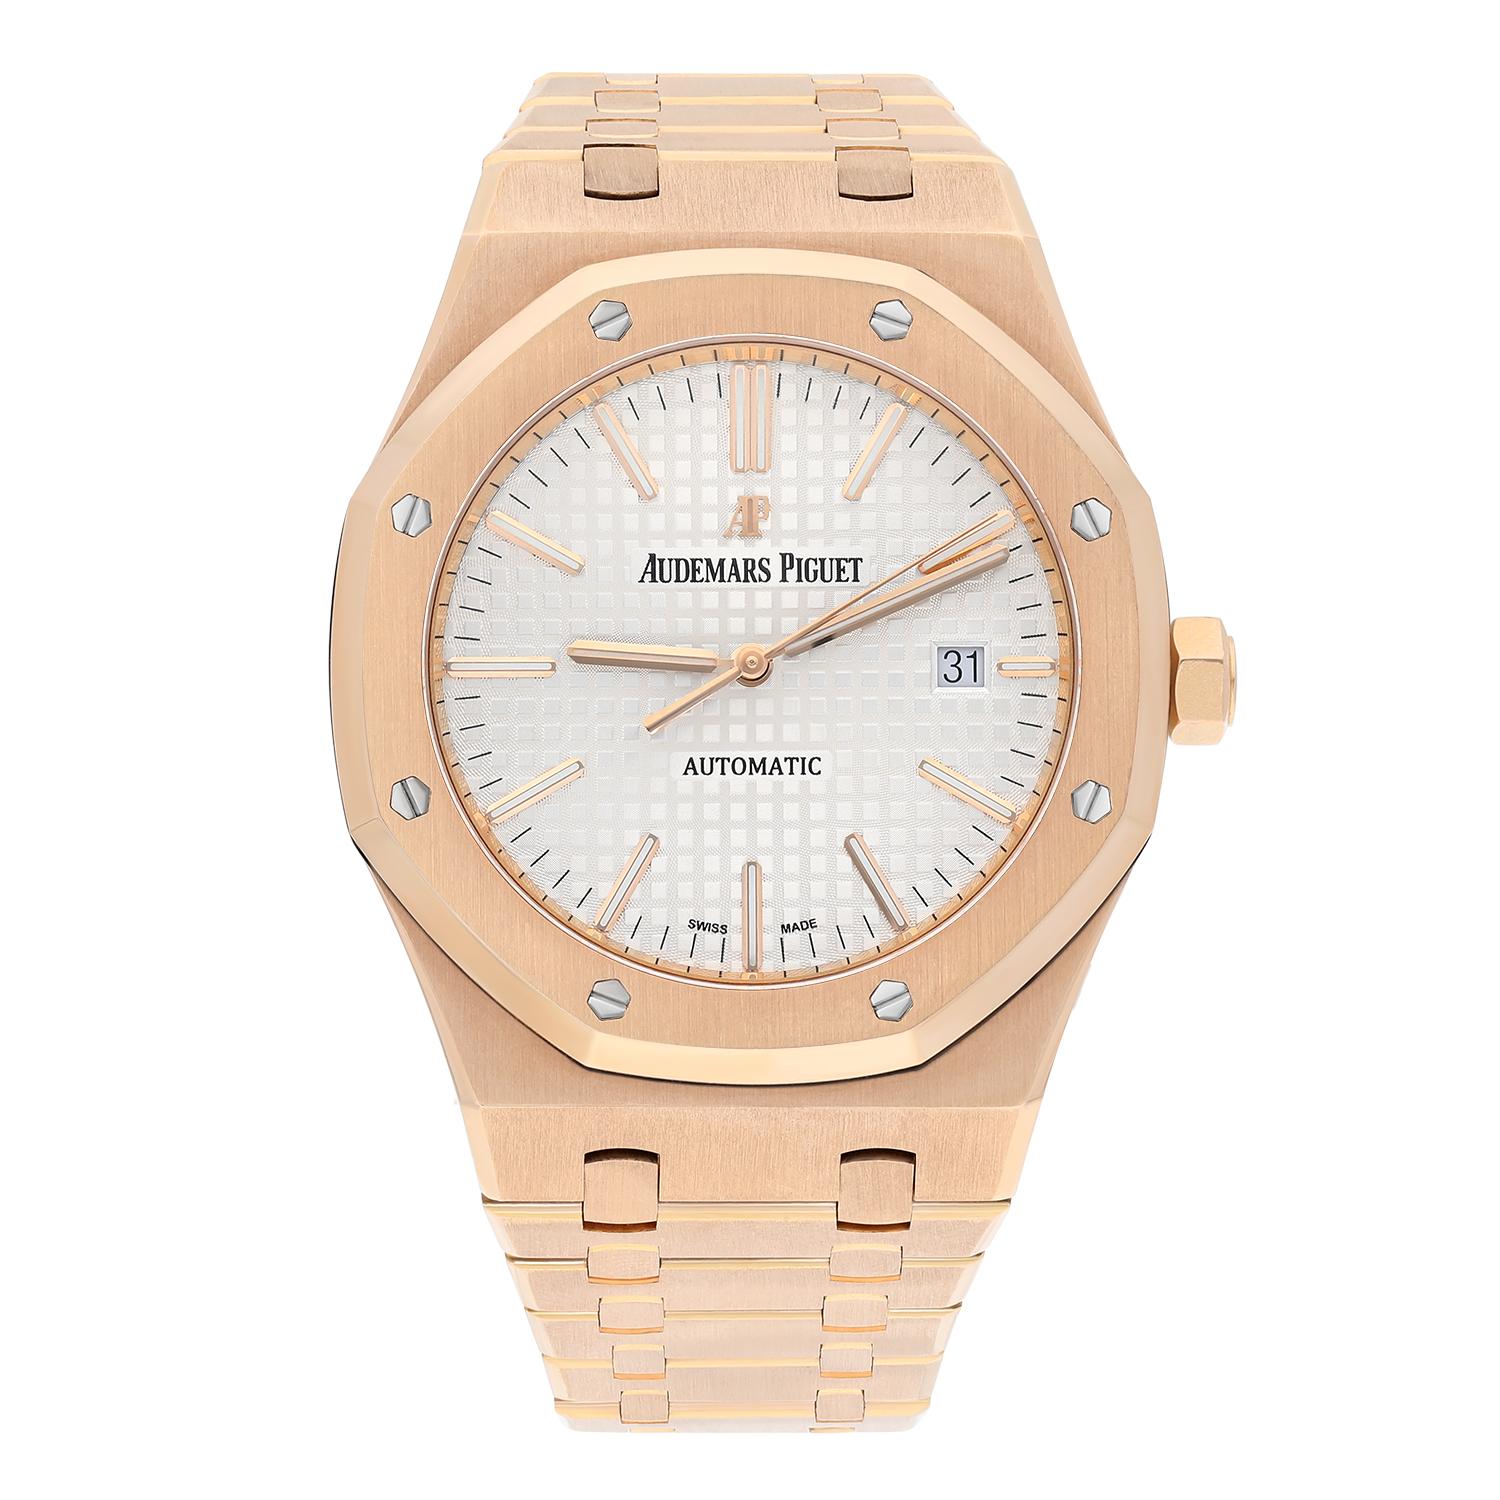 Elevate your style with this exquisite Audemars Piguet Royal Oak Automatic Men's Watch. Crafted in elegant rose gold, this 41mm timepiece exudes sophistication and luxury. Pre-owned and in impeccable condition, it comes complete with its original